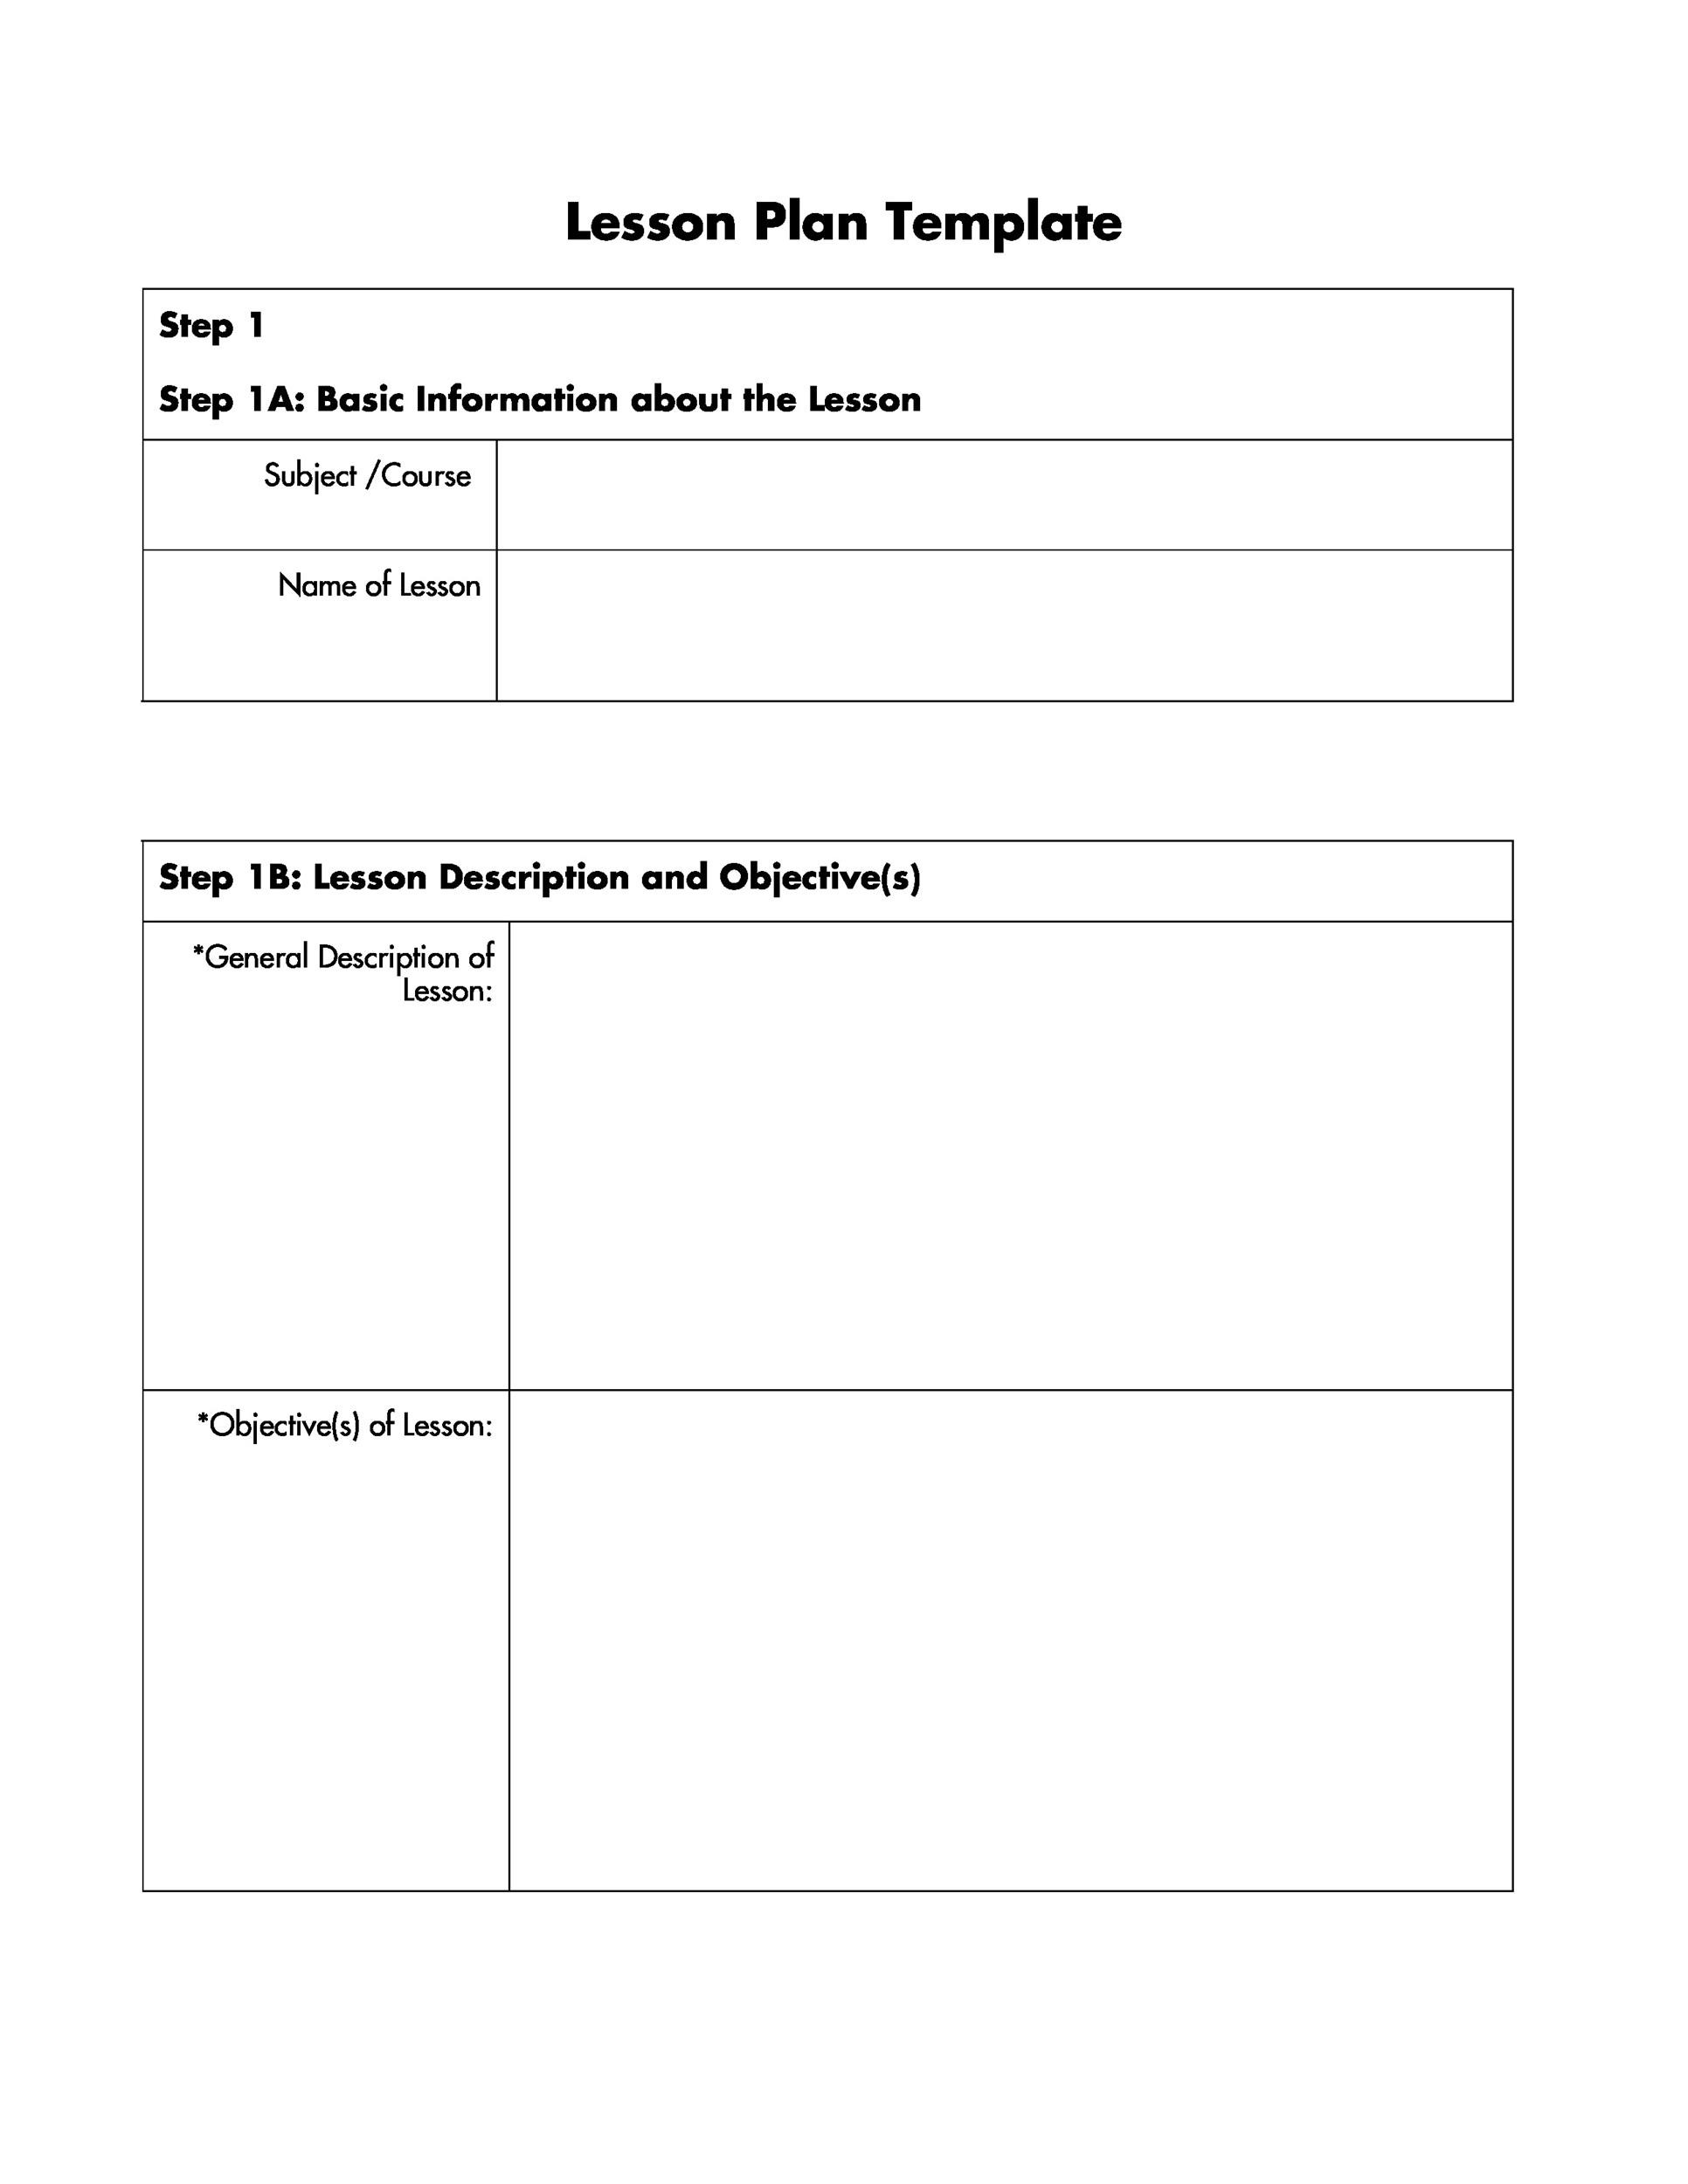 Lesson Plan Template For Elementary Here S Why You Should Attend Lesson 